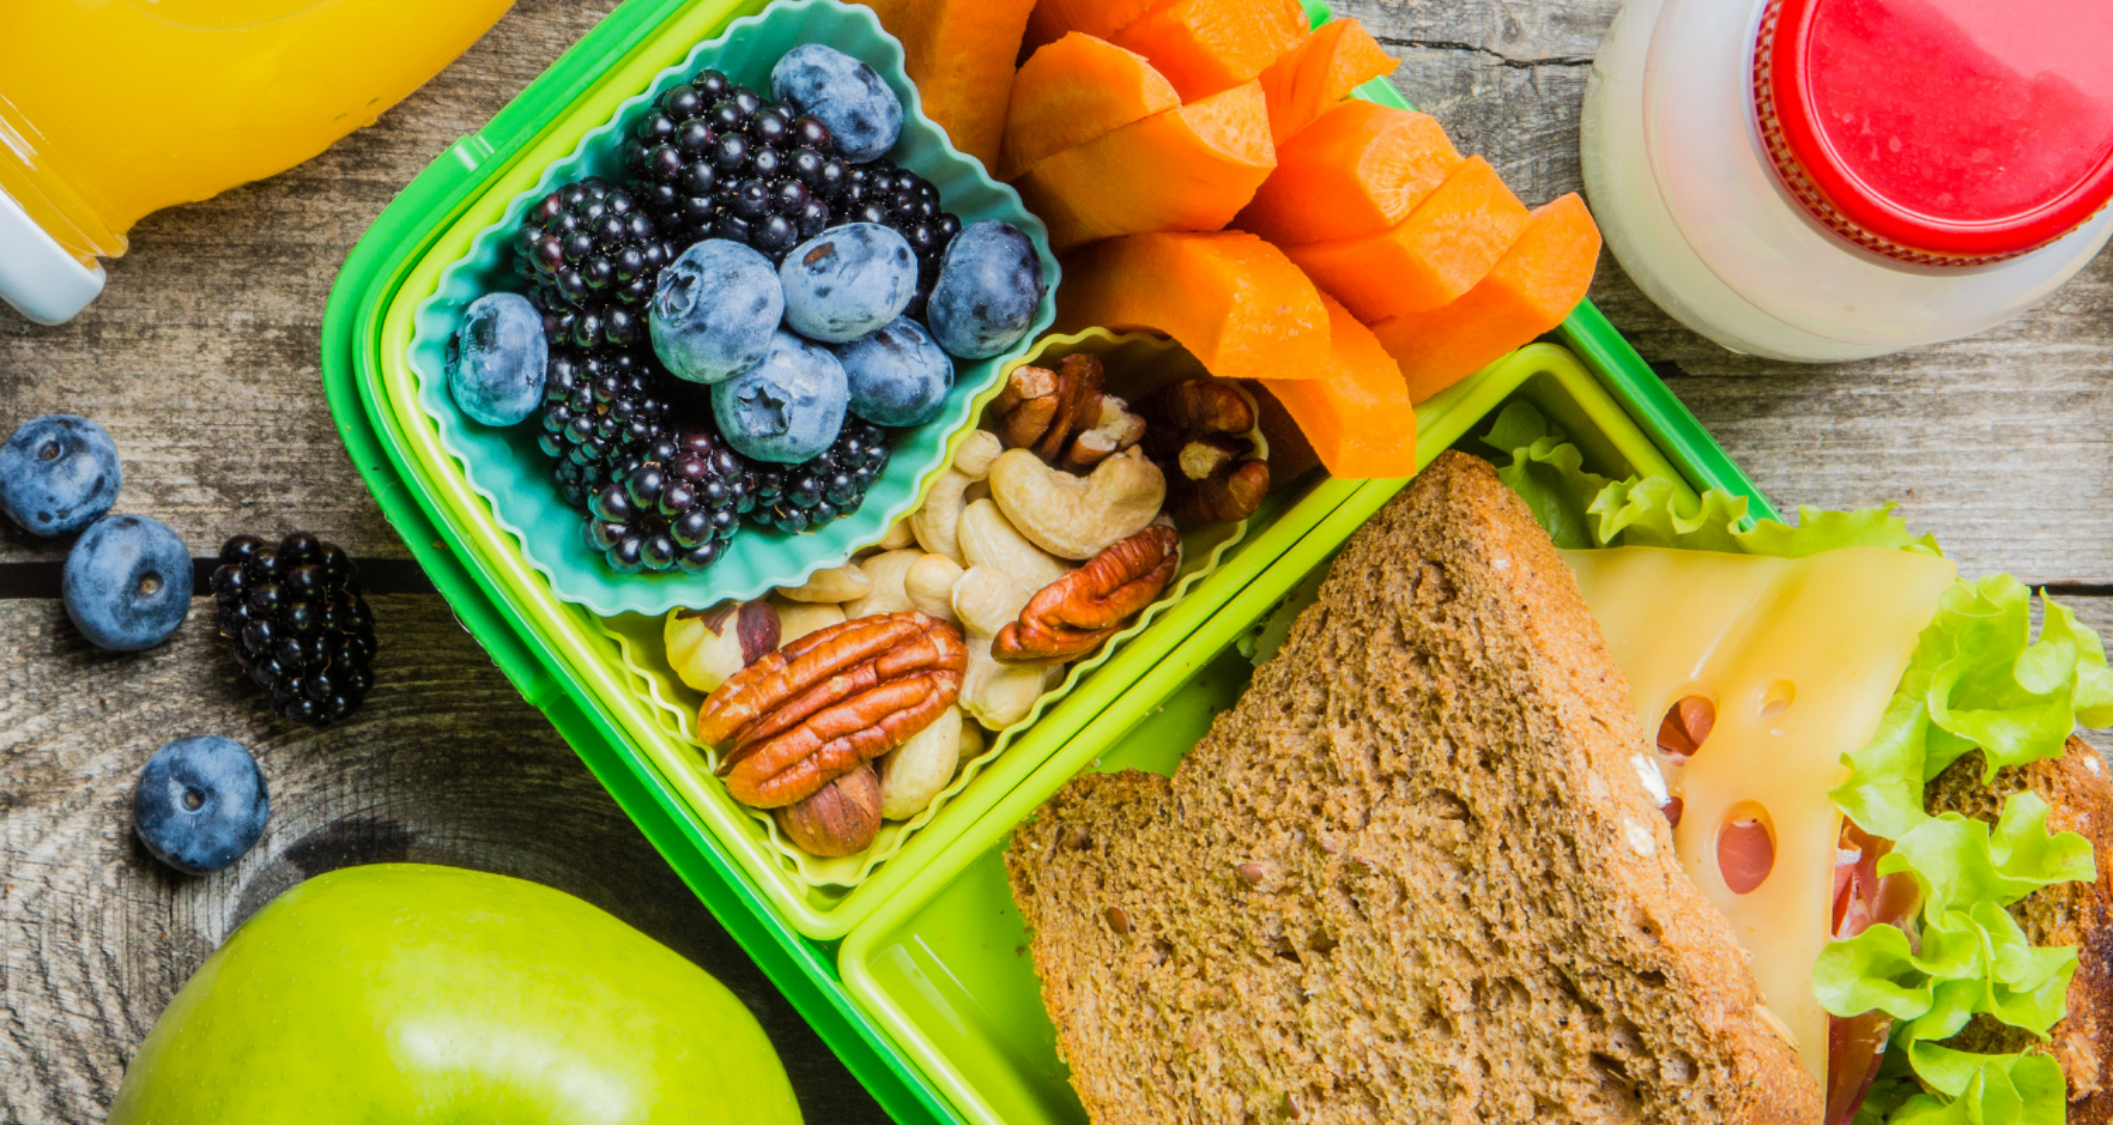 3 Tips For Packing A Healthy Balanced Lunch Box - The Natural Nurturer